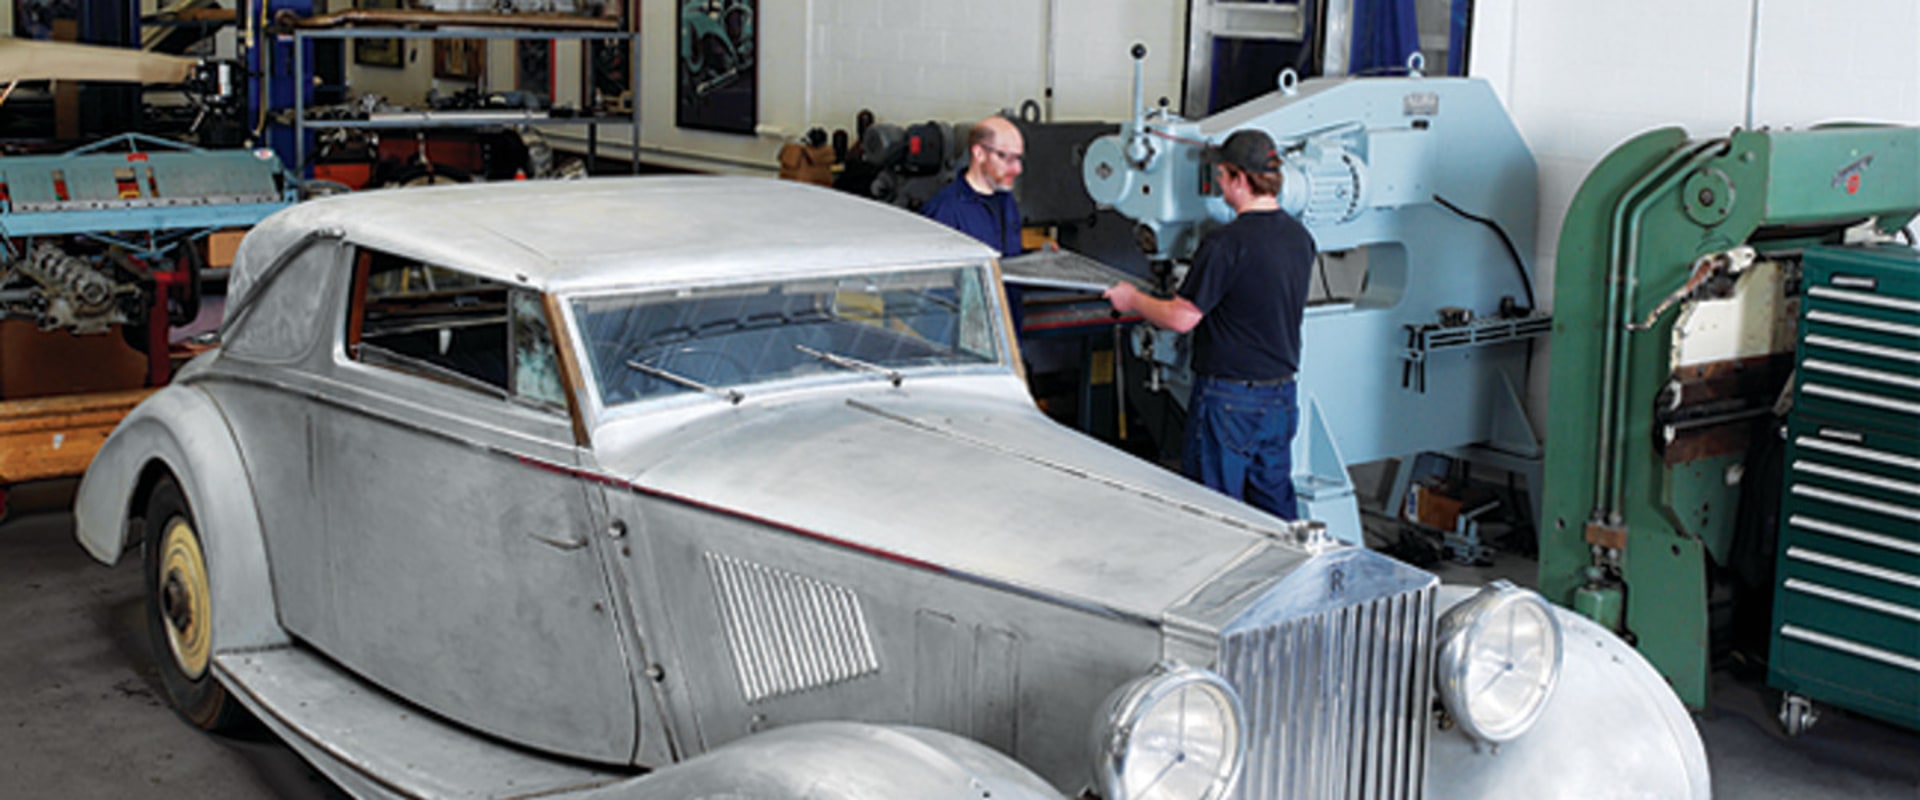 Retouching and Restoring Old Vintage Motor Photos